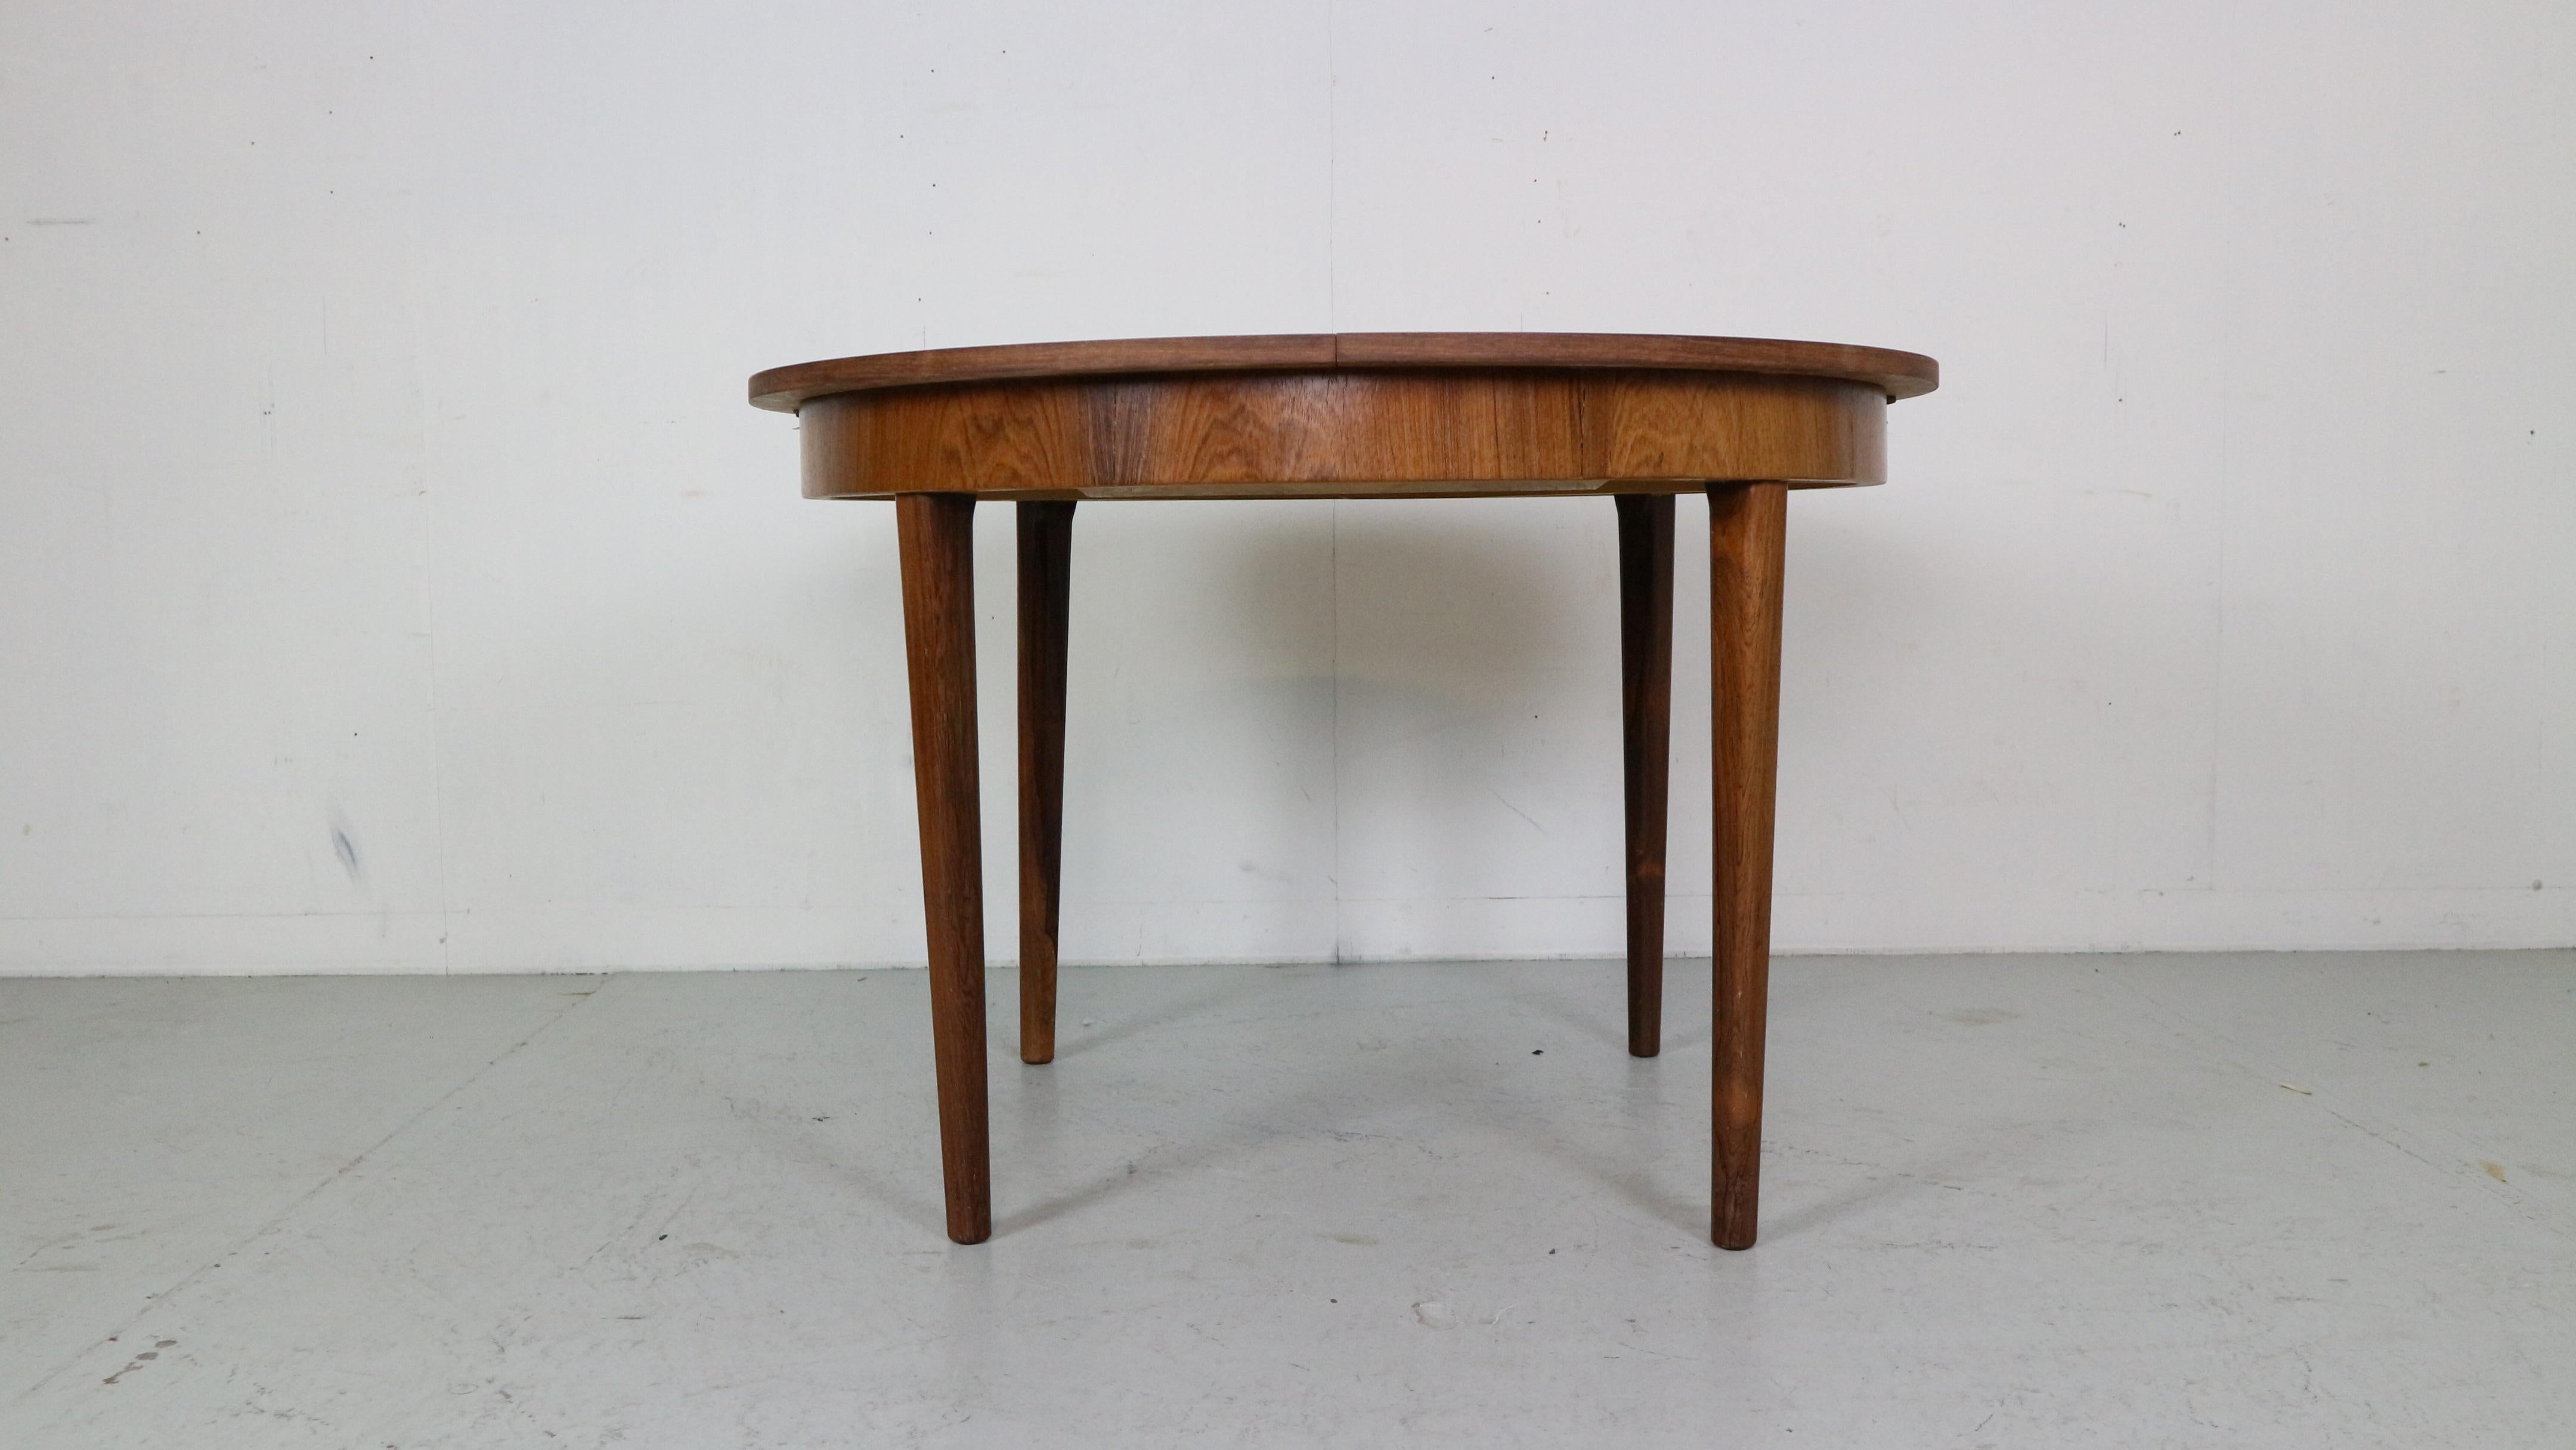 Scandinavian Modern period round extendable dining table made in 1960s period, Denmark.
Stunning dining table has an elegant table feet and beautiful wooden pattern round and oval (then extended) tabletop.
This table is extendable from 110cm to